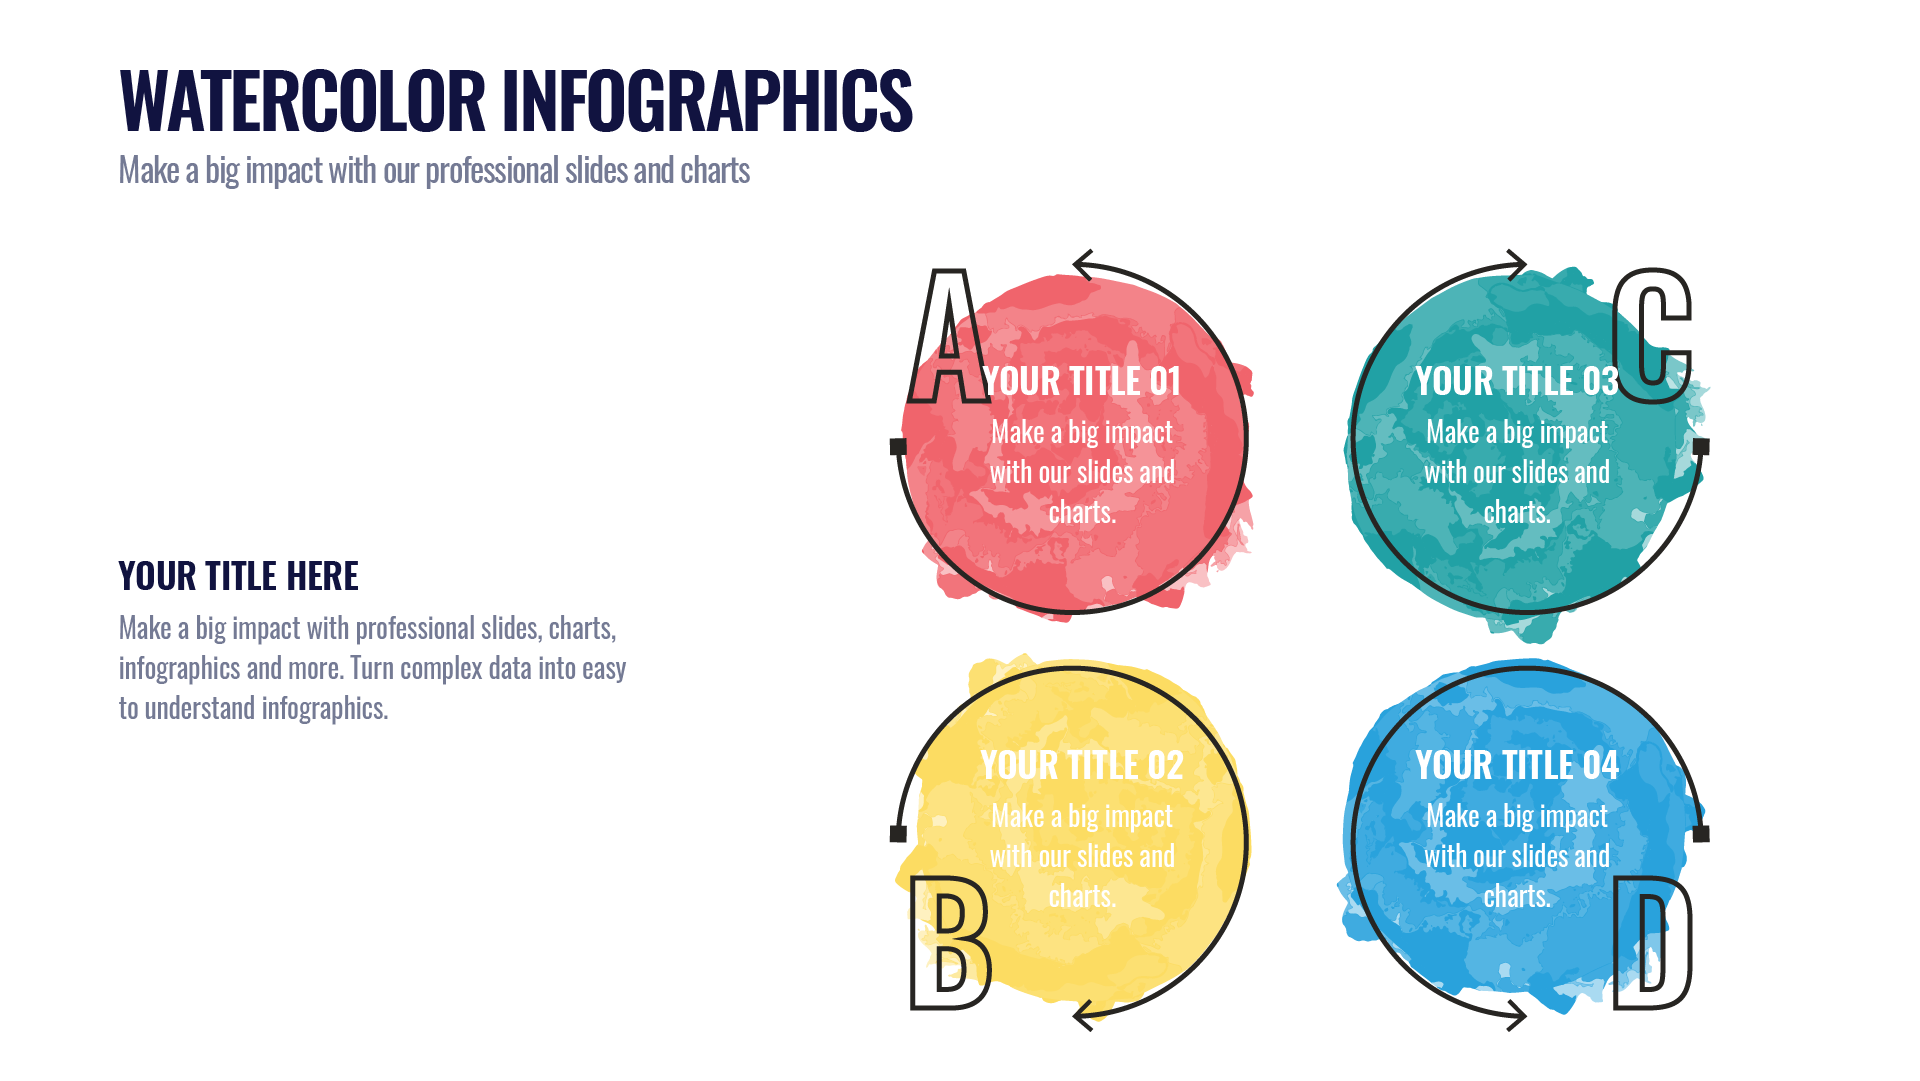 Watercolor Infographic templates